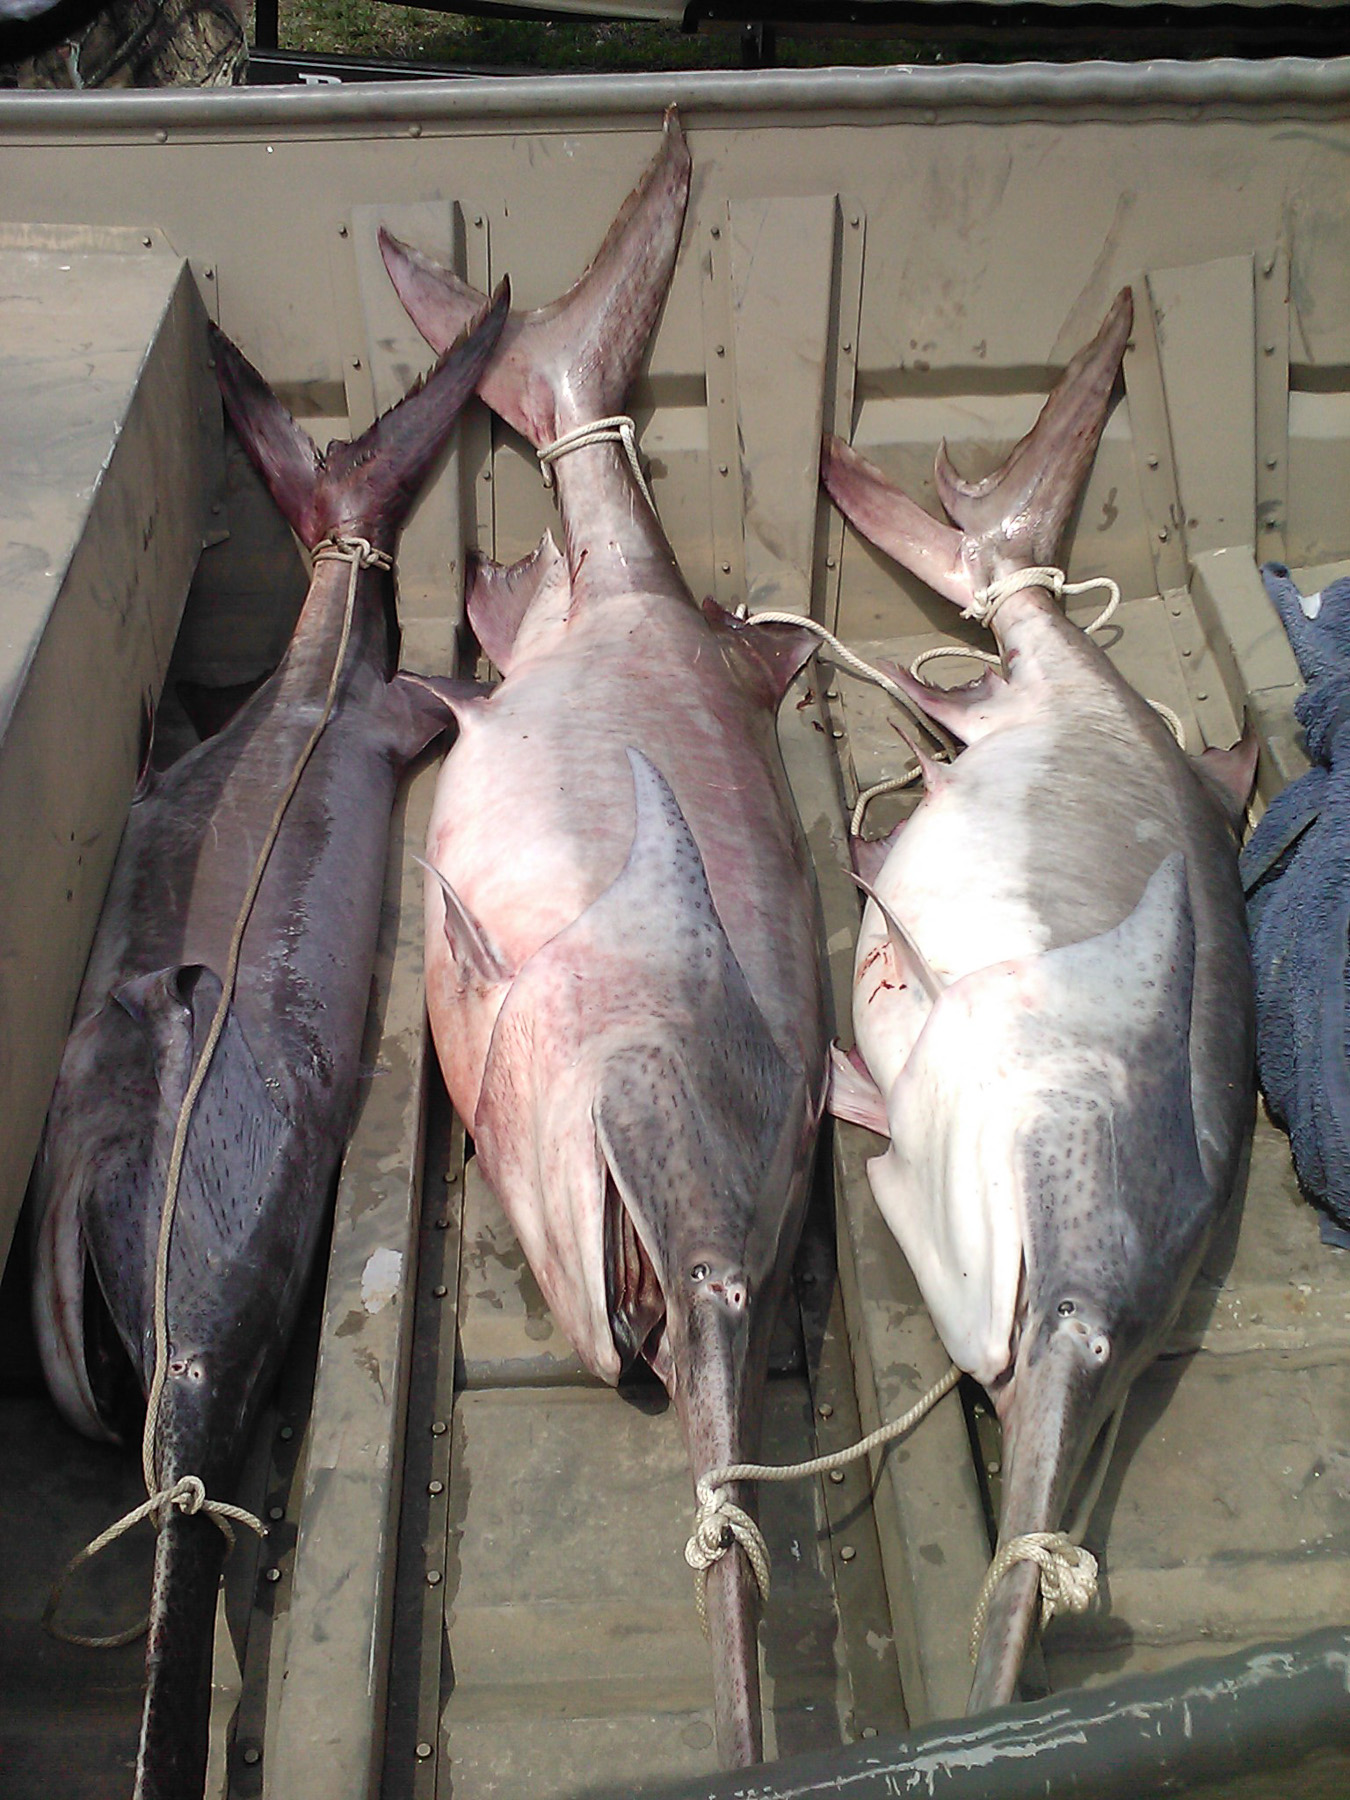 Harvested Paddlefish in Boat